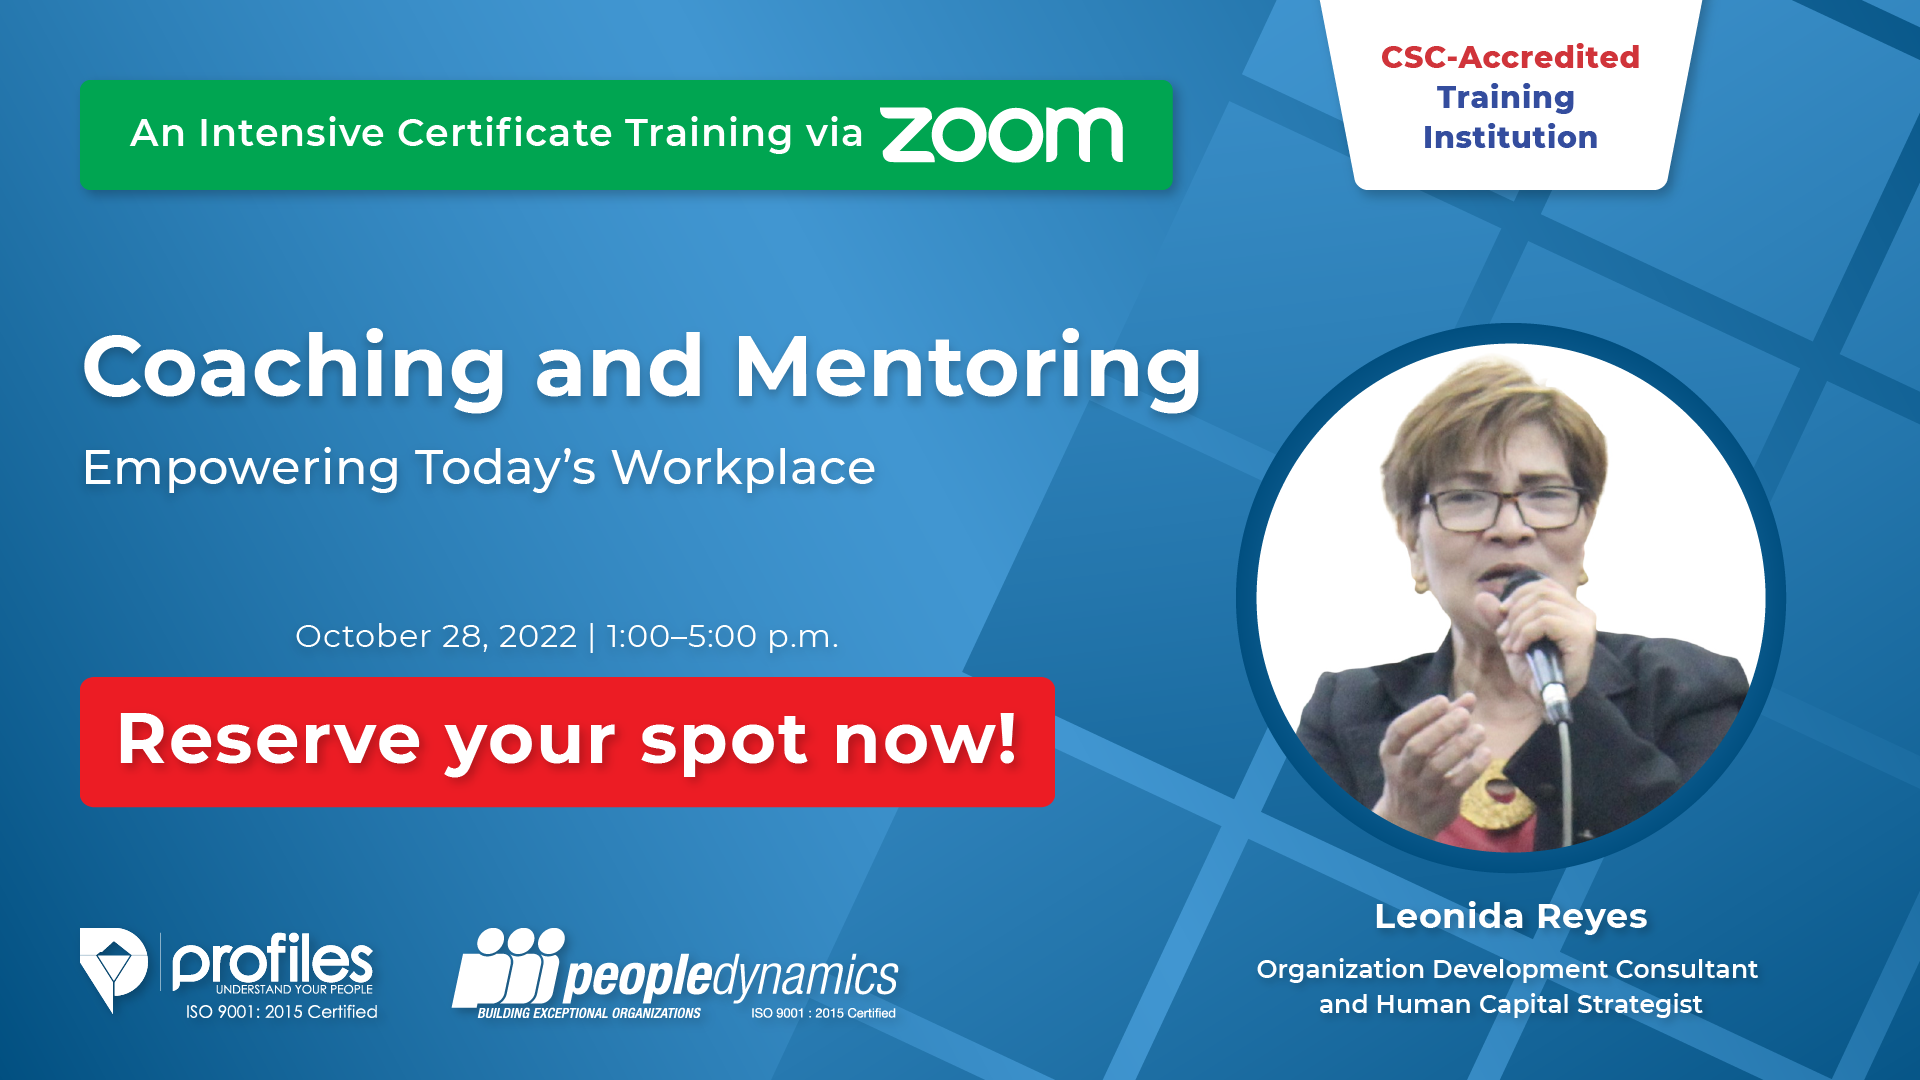 Coaching and Mentoring: Empowering Today's Workplace